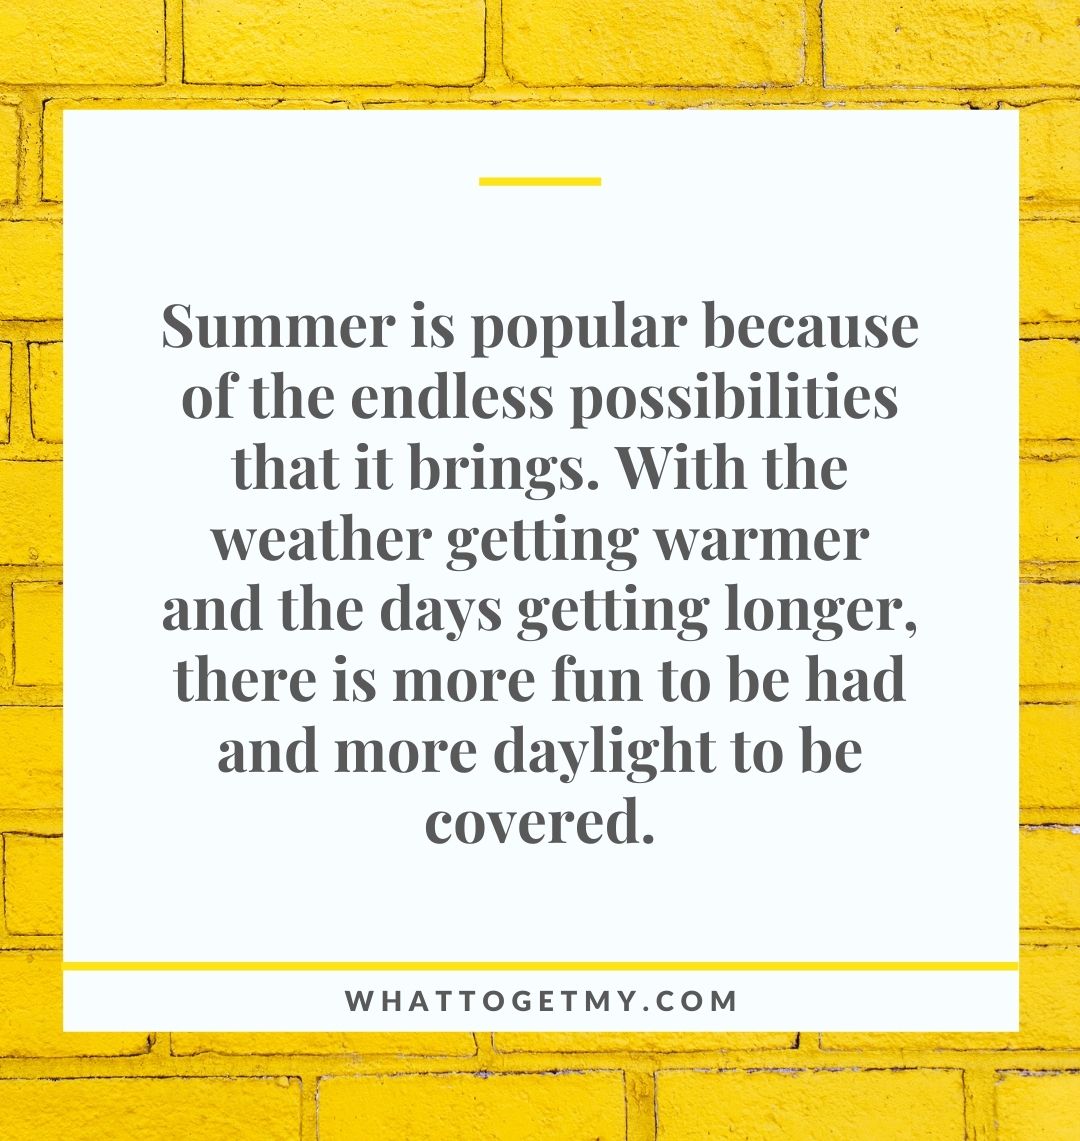 summer is popular because of the endless possibilities that it brings. With the weather getting warmer and the days getting longer, there is more fun to be had and more daylight to be covered